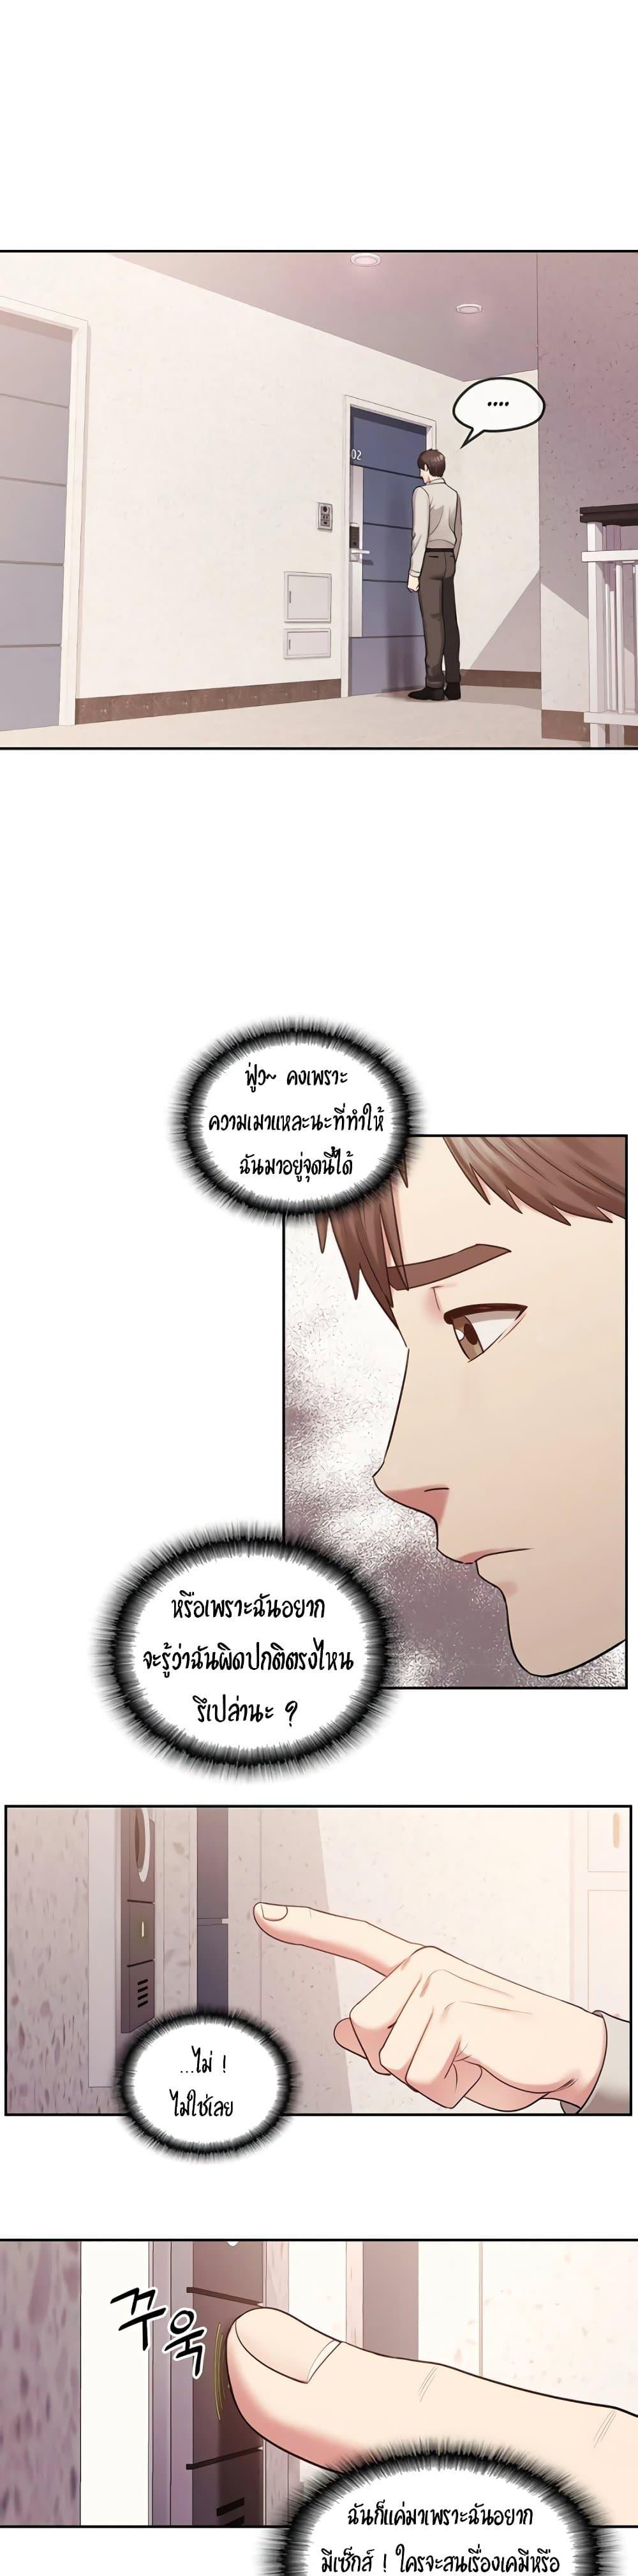 Sexual Consulting 2 ภาพ 22